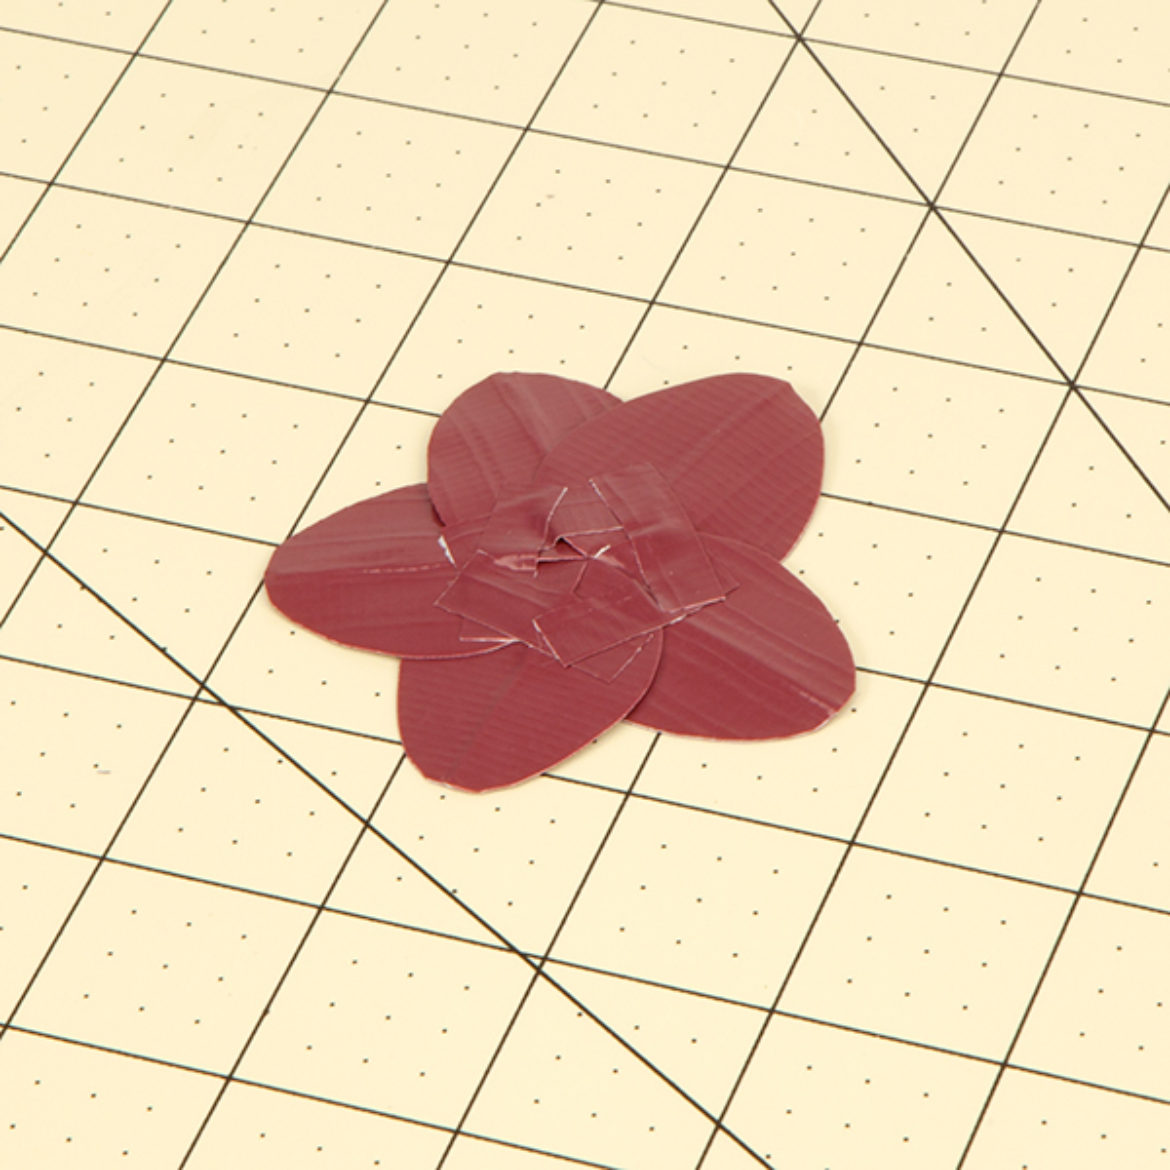 Tape the backs of the petals together to form a flower shape